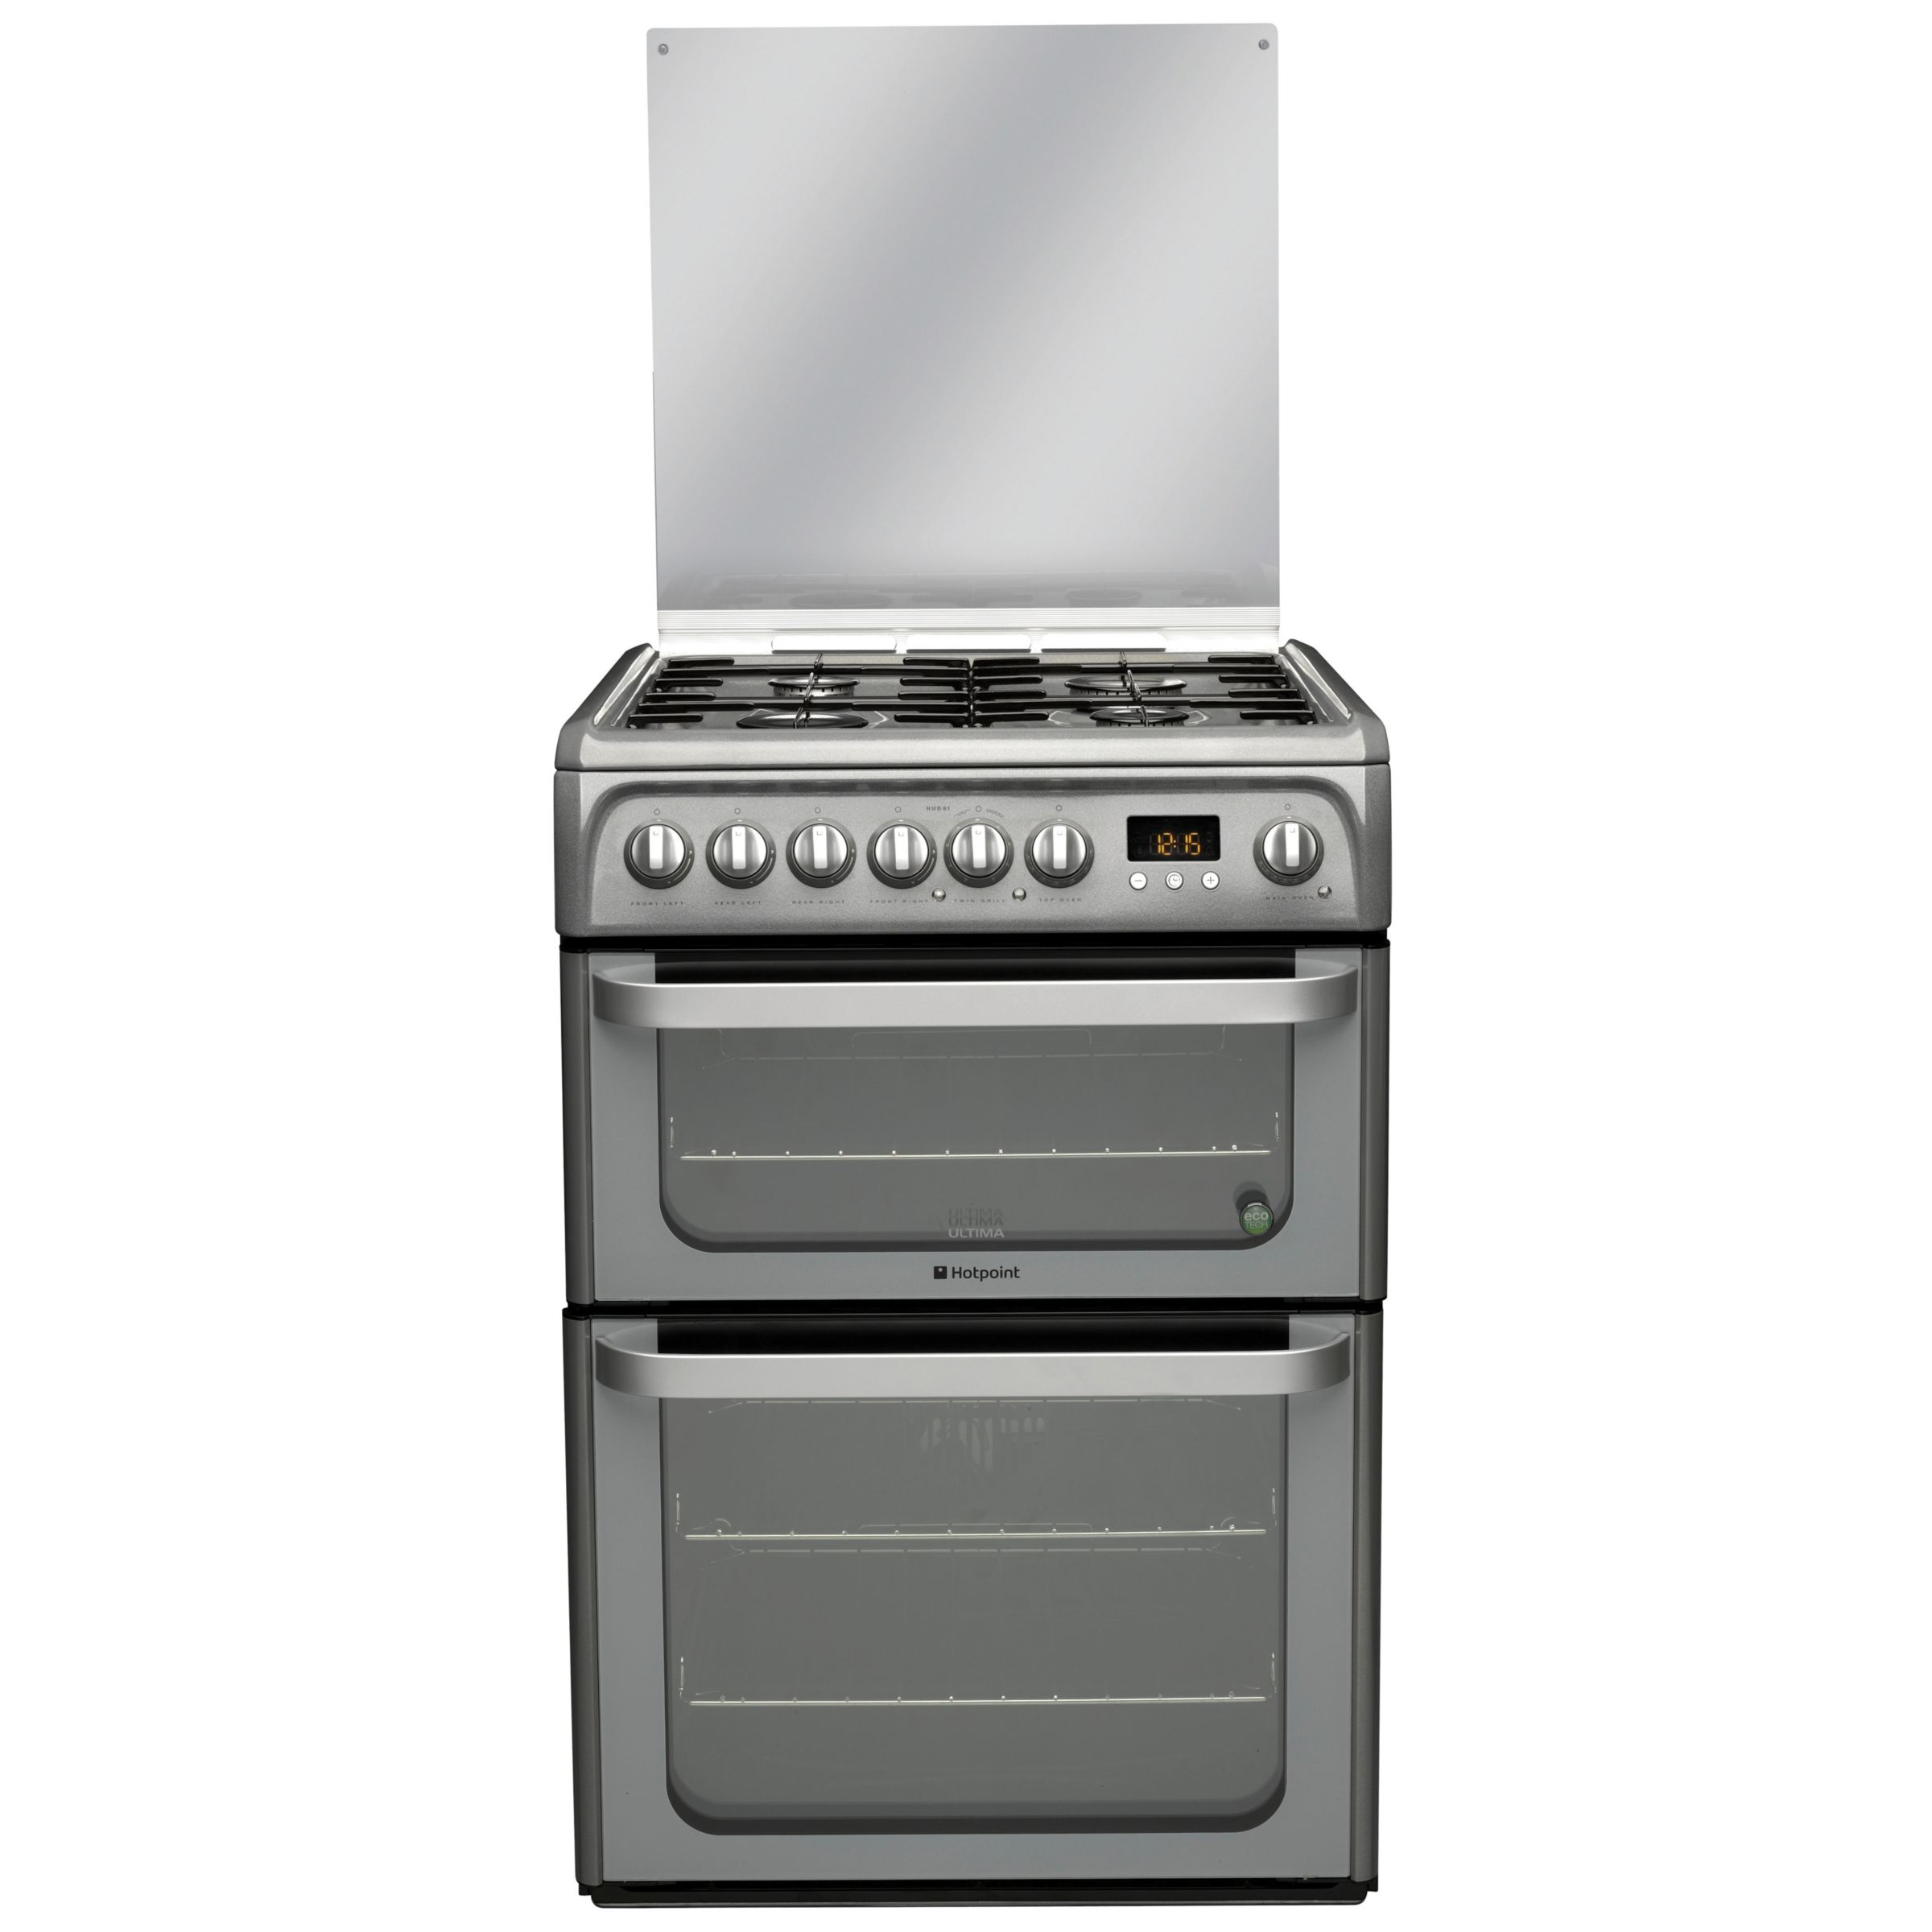 Hotpoint HUD61G Ultima Dual Fuel Cooker, Graphite at John Lewis